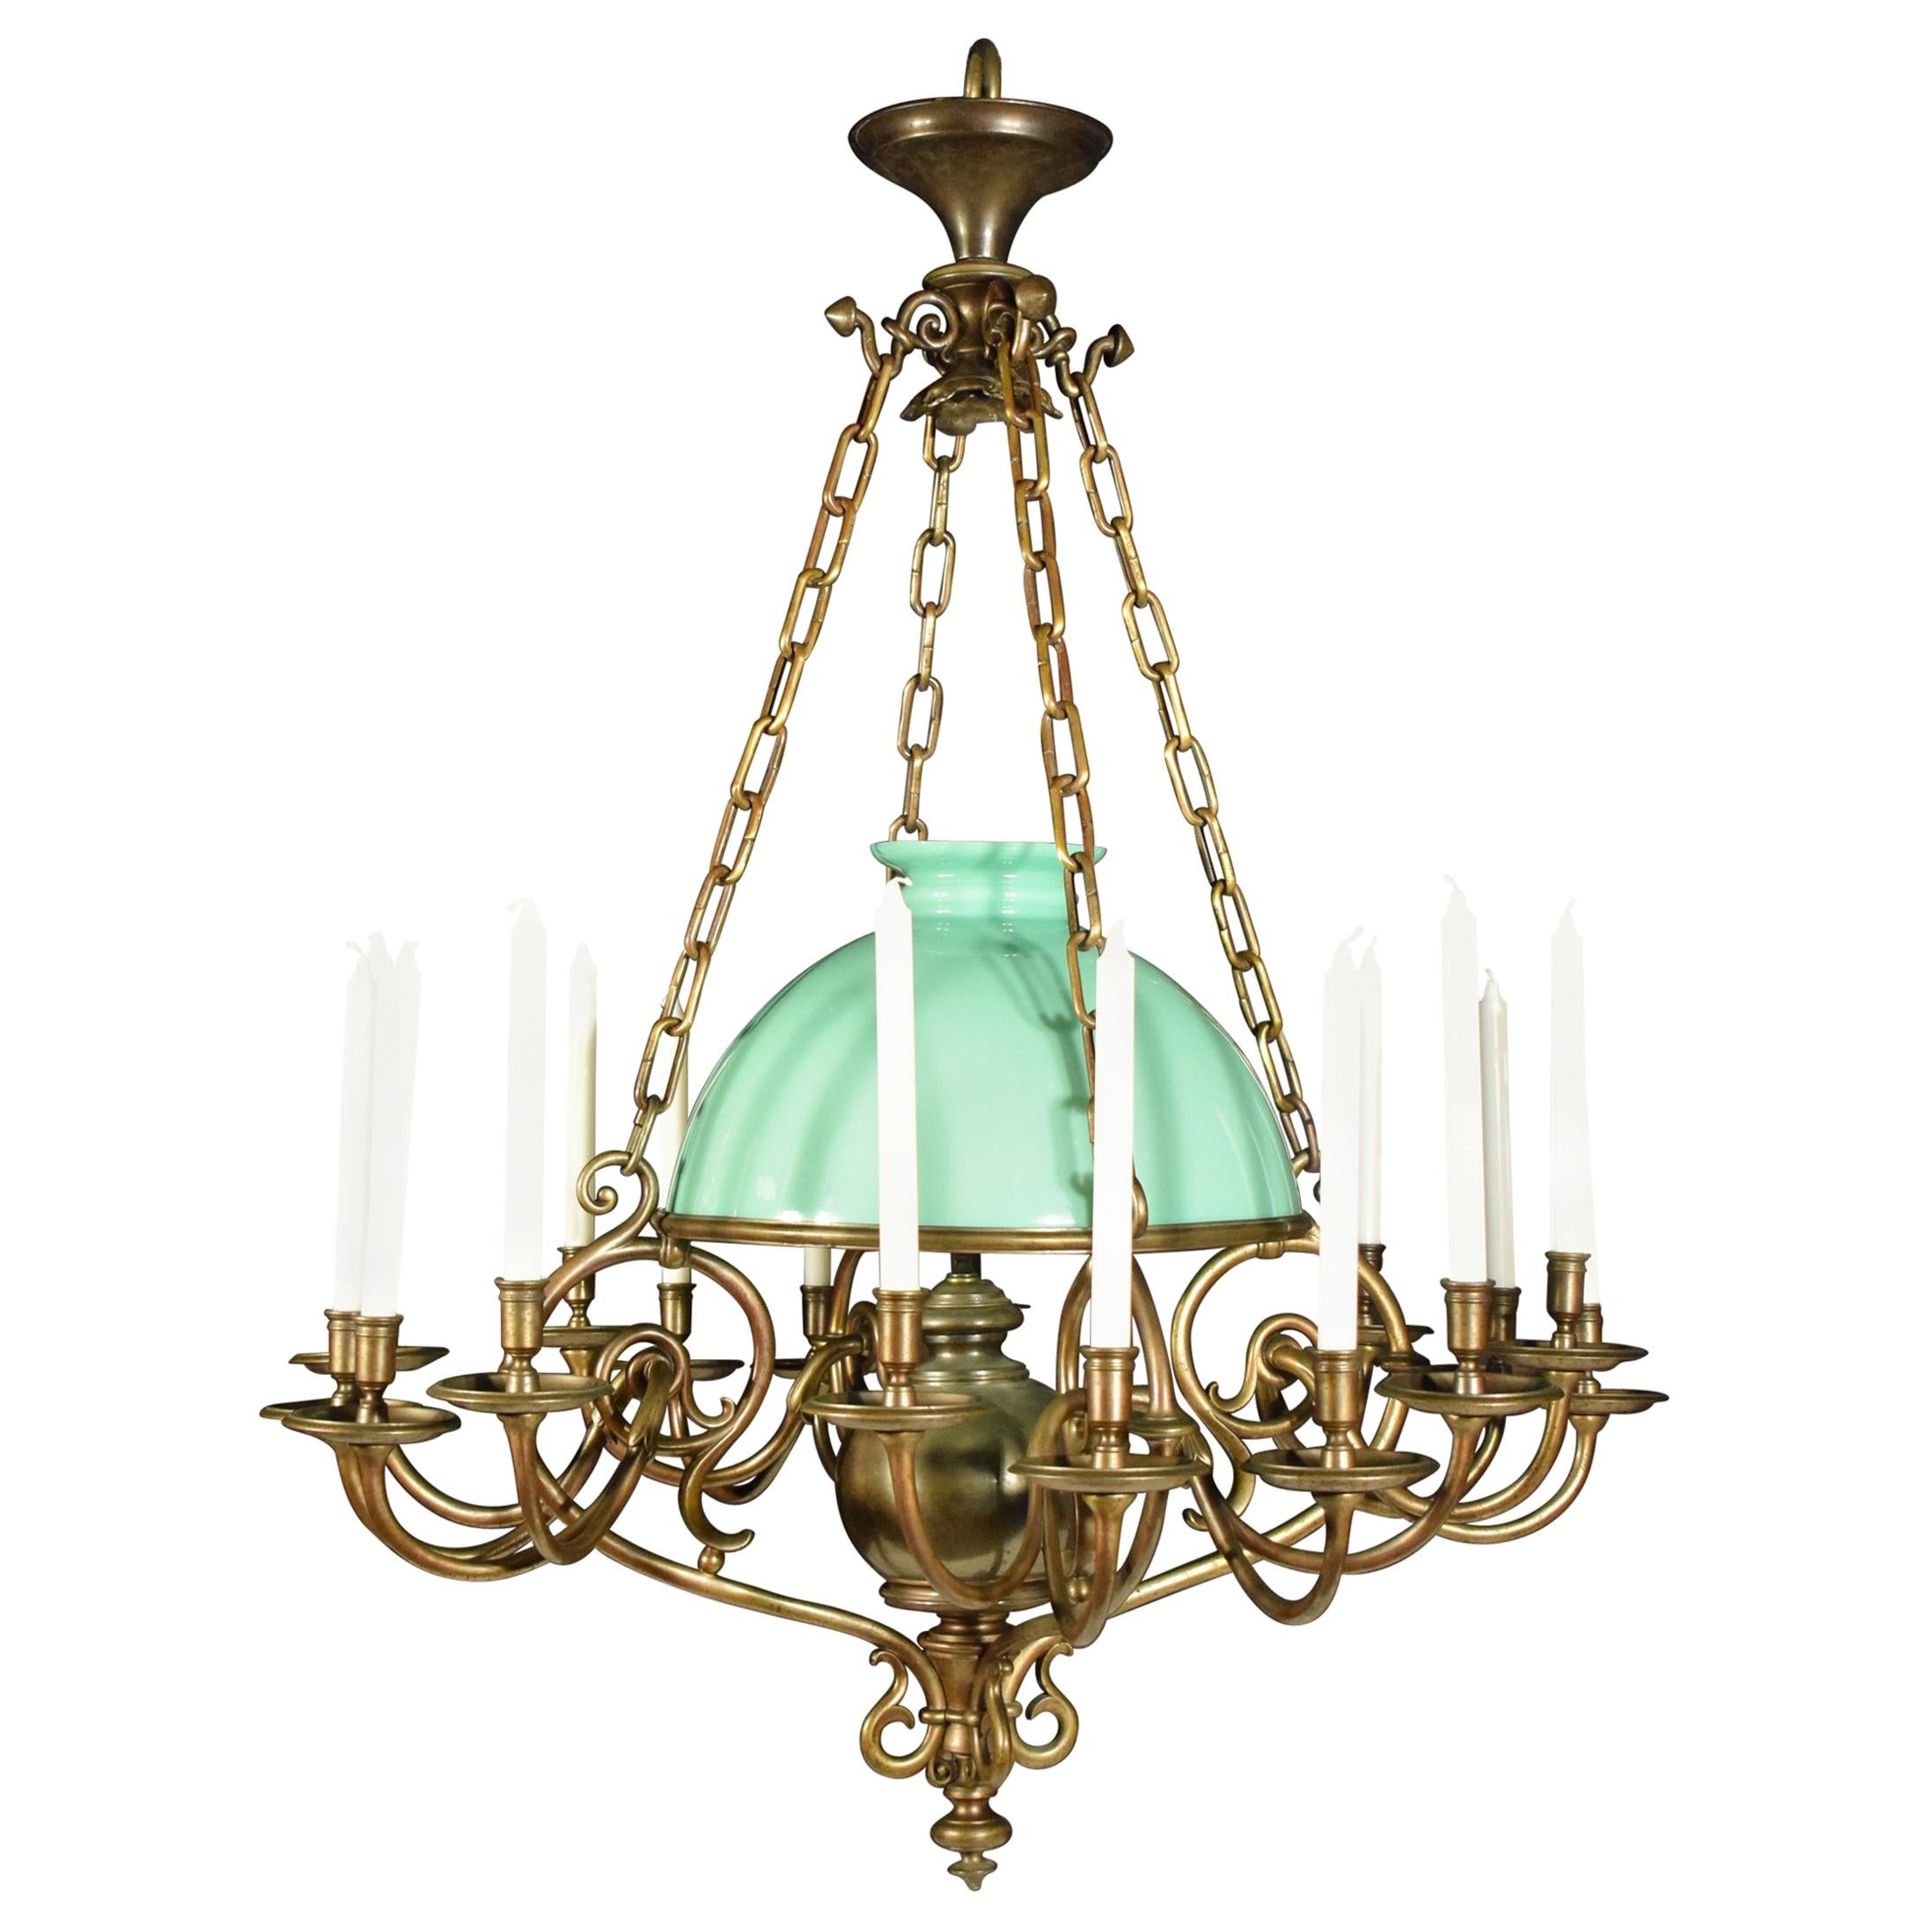 Very Fine Bronze Chandelier with Its Original Pale Green Shade